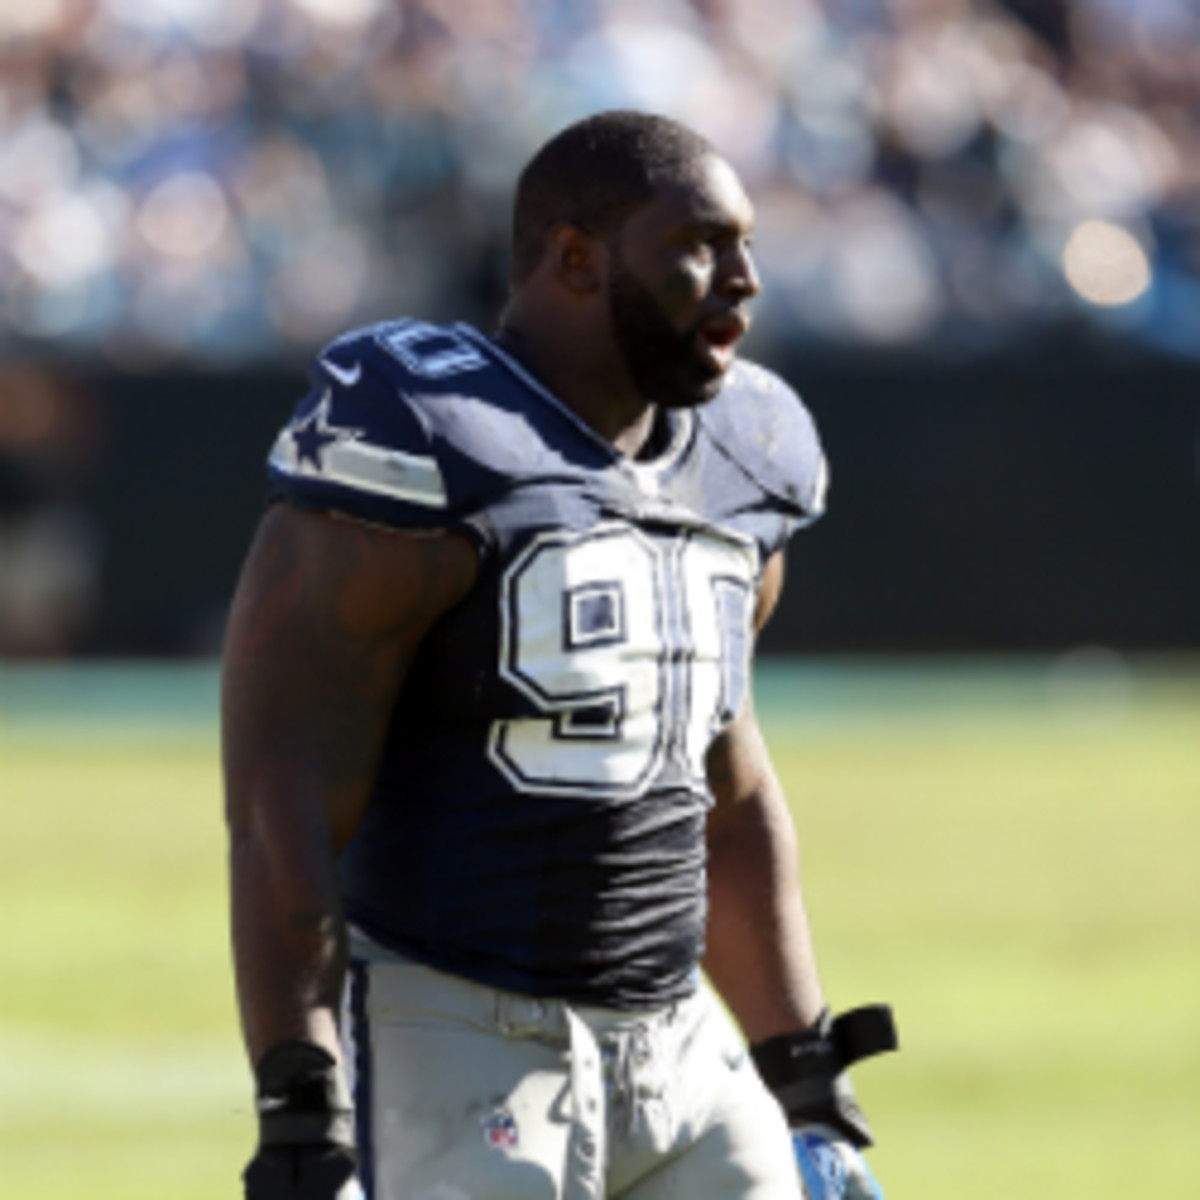 The Cowboys' Jay Ratliff got into a heated argument with owner Jerry Jones last Sunday. (Streeter Lecka/Getty Images)